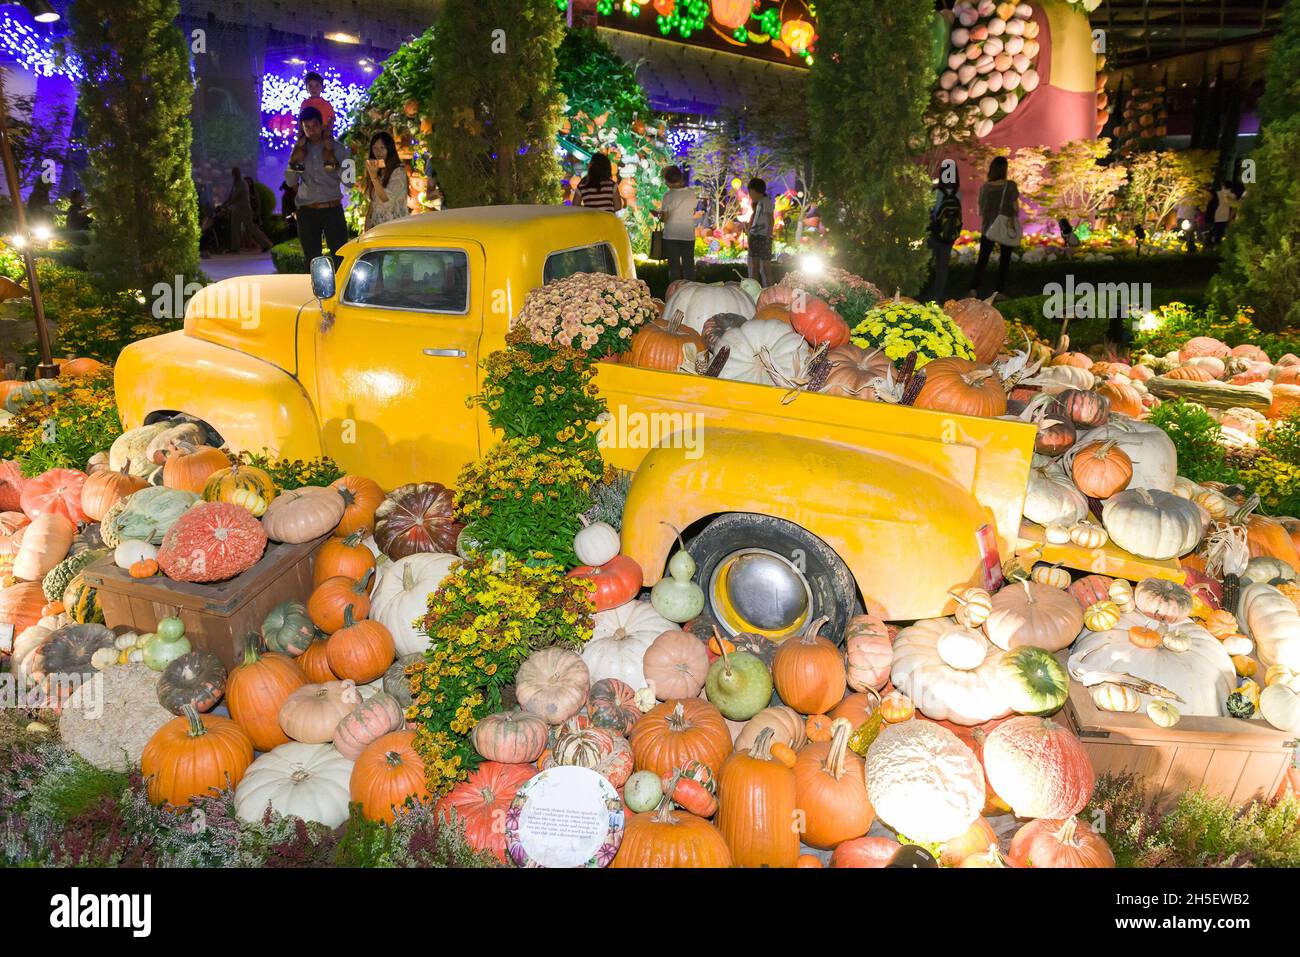 Singapore, Singapore - 06 October 2017: Celebrating Halloween at Gardens by the Bay with huge display of pumpkins. Stock Photo